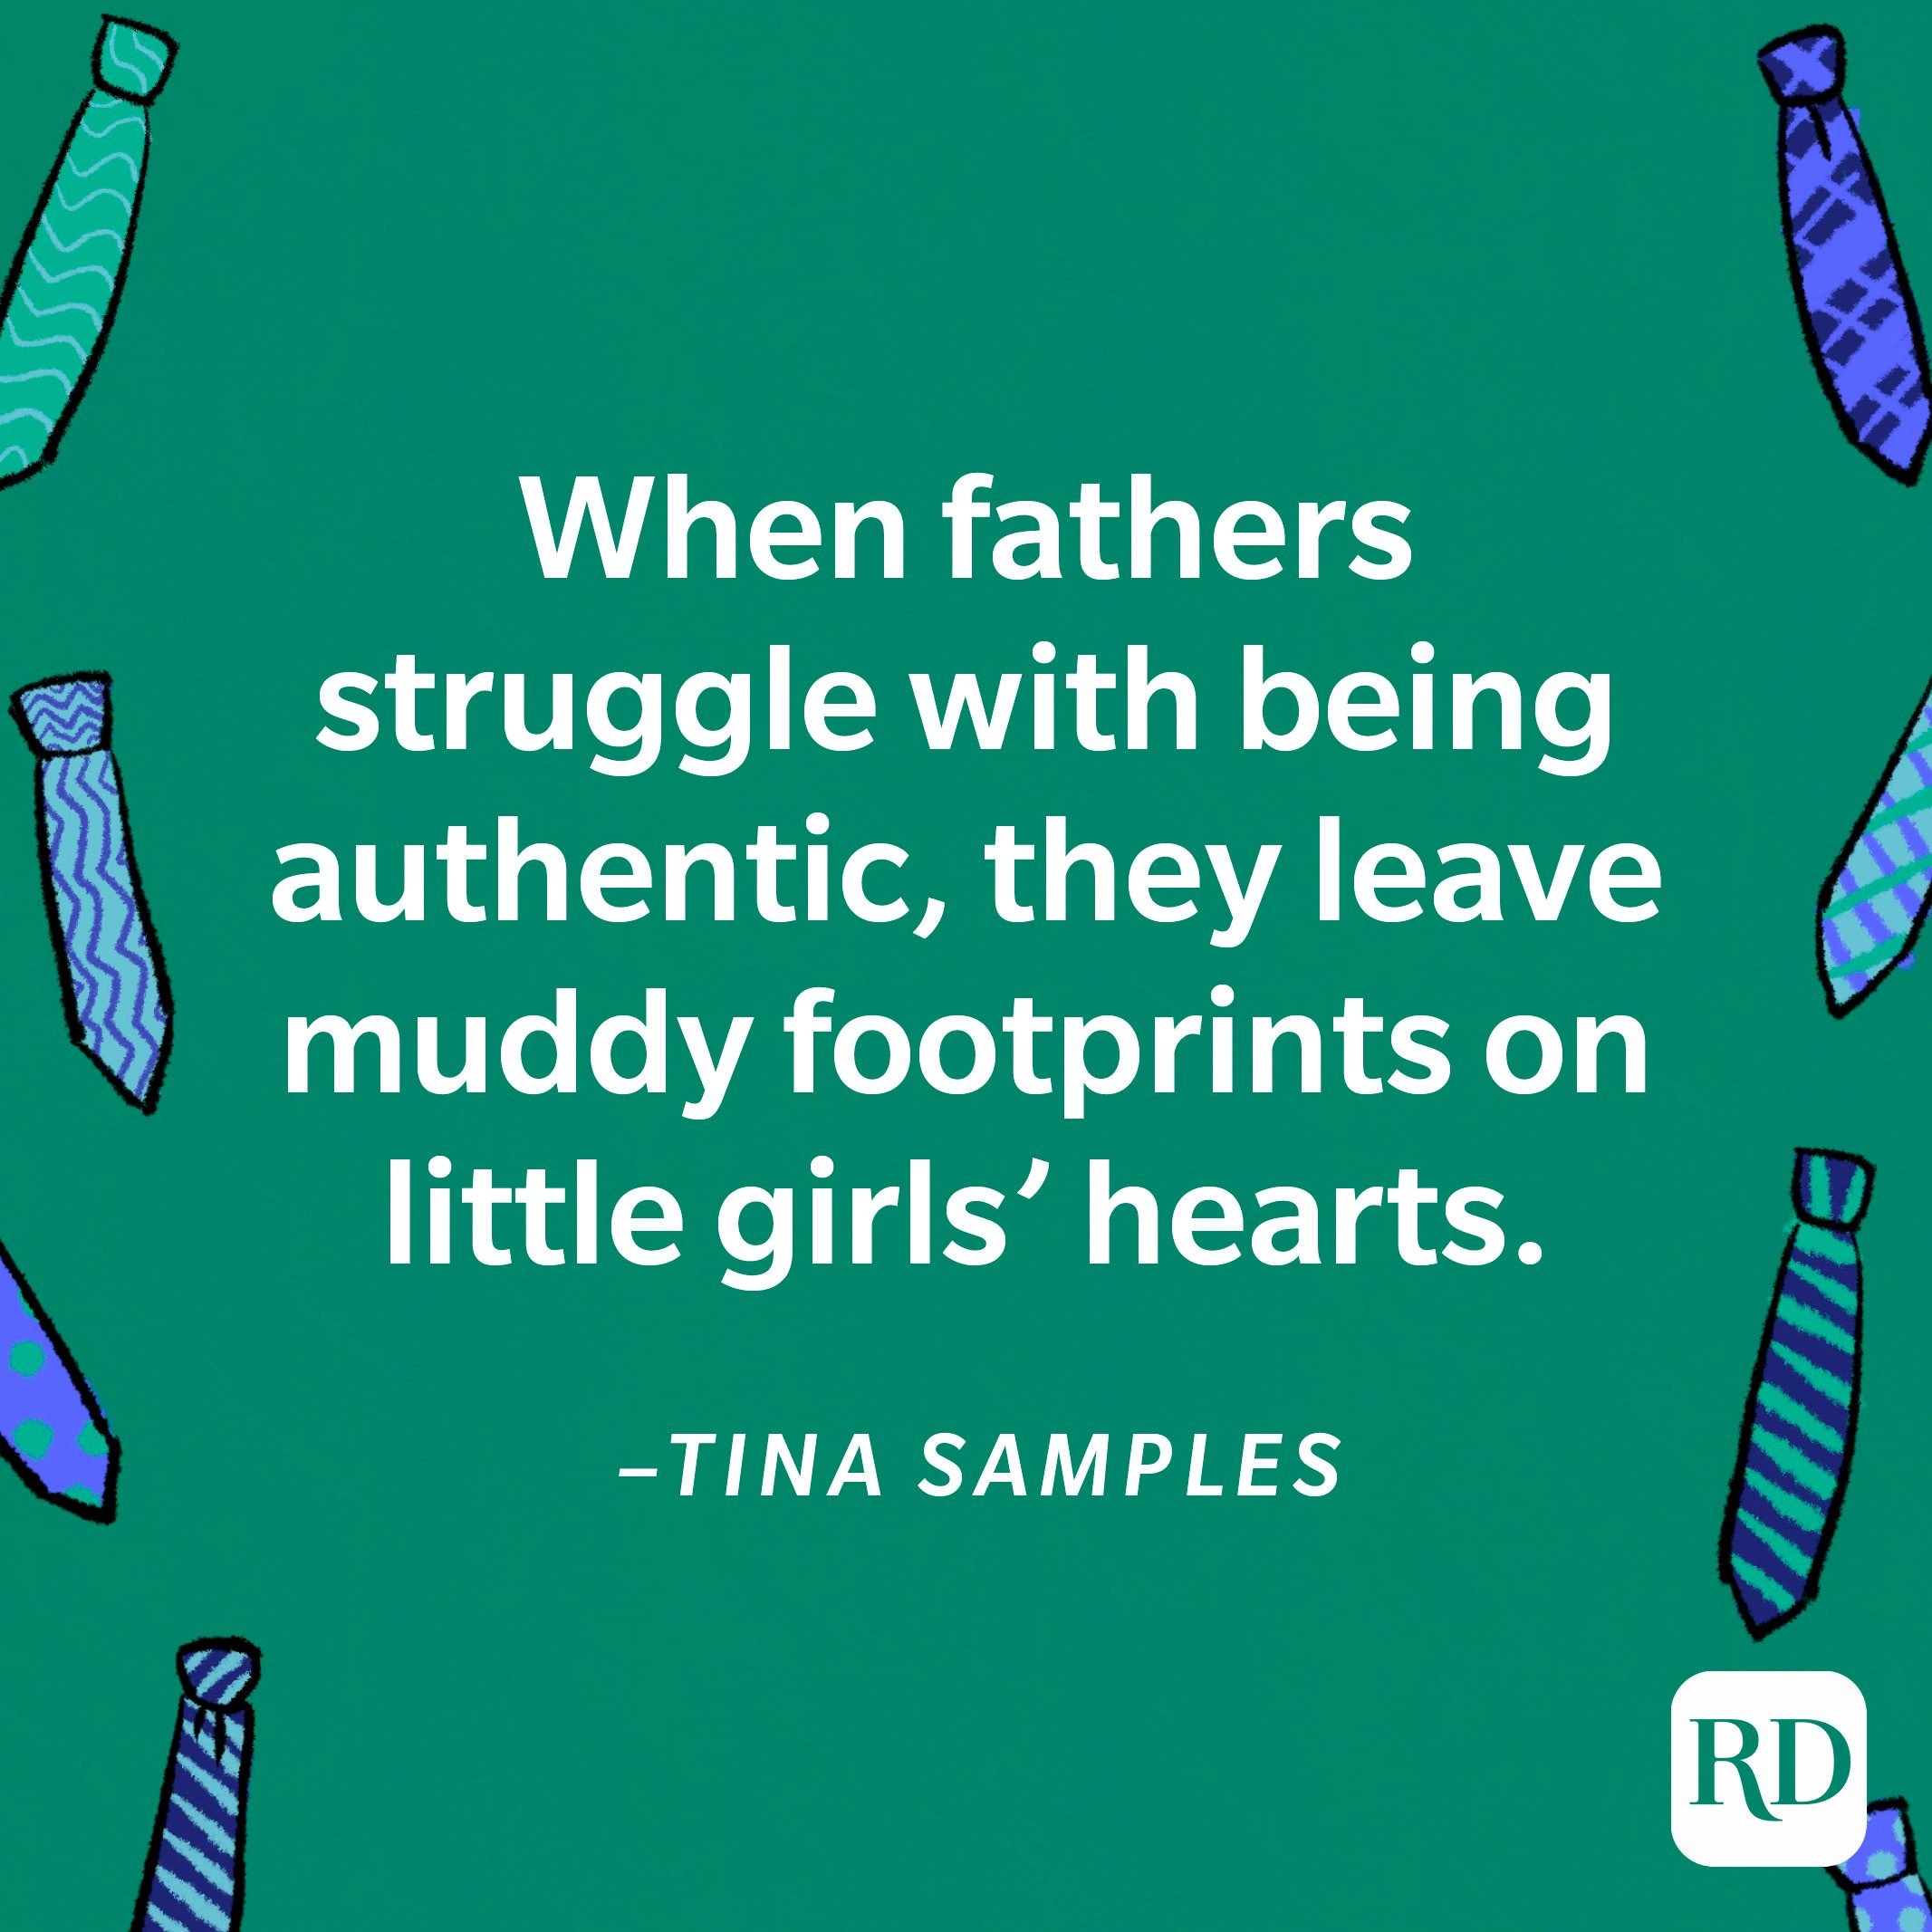 “When fathers struggle with being authentic, they leave muddy footprints on little girls' hearts."—Tina Samples